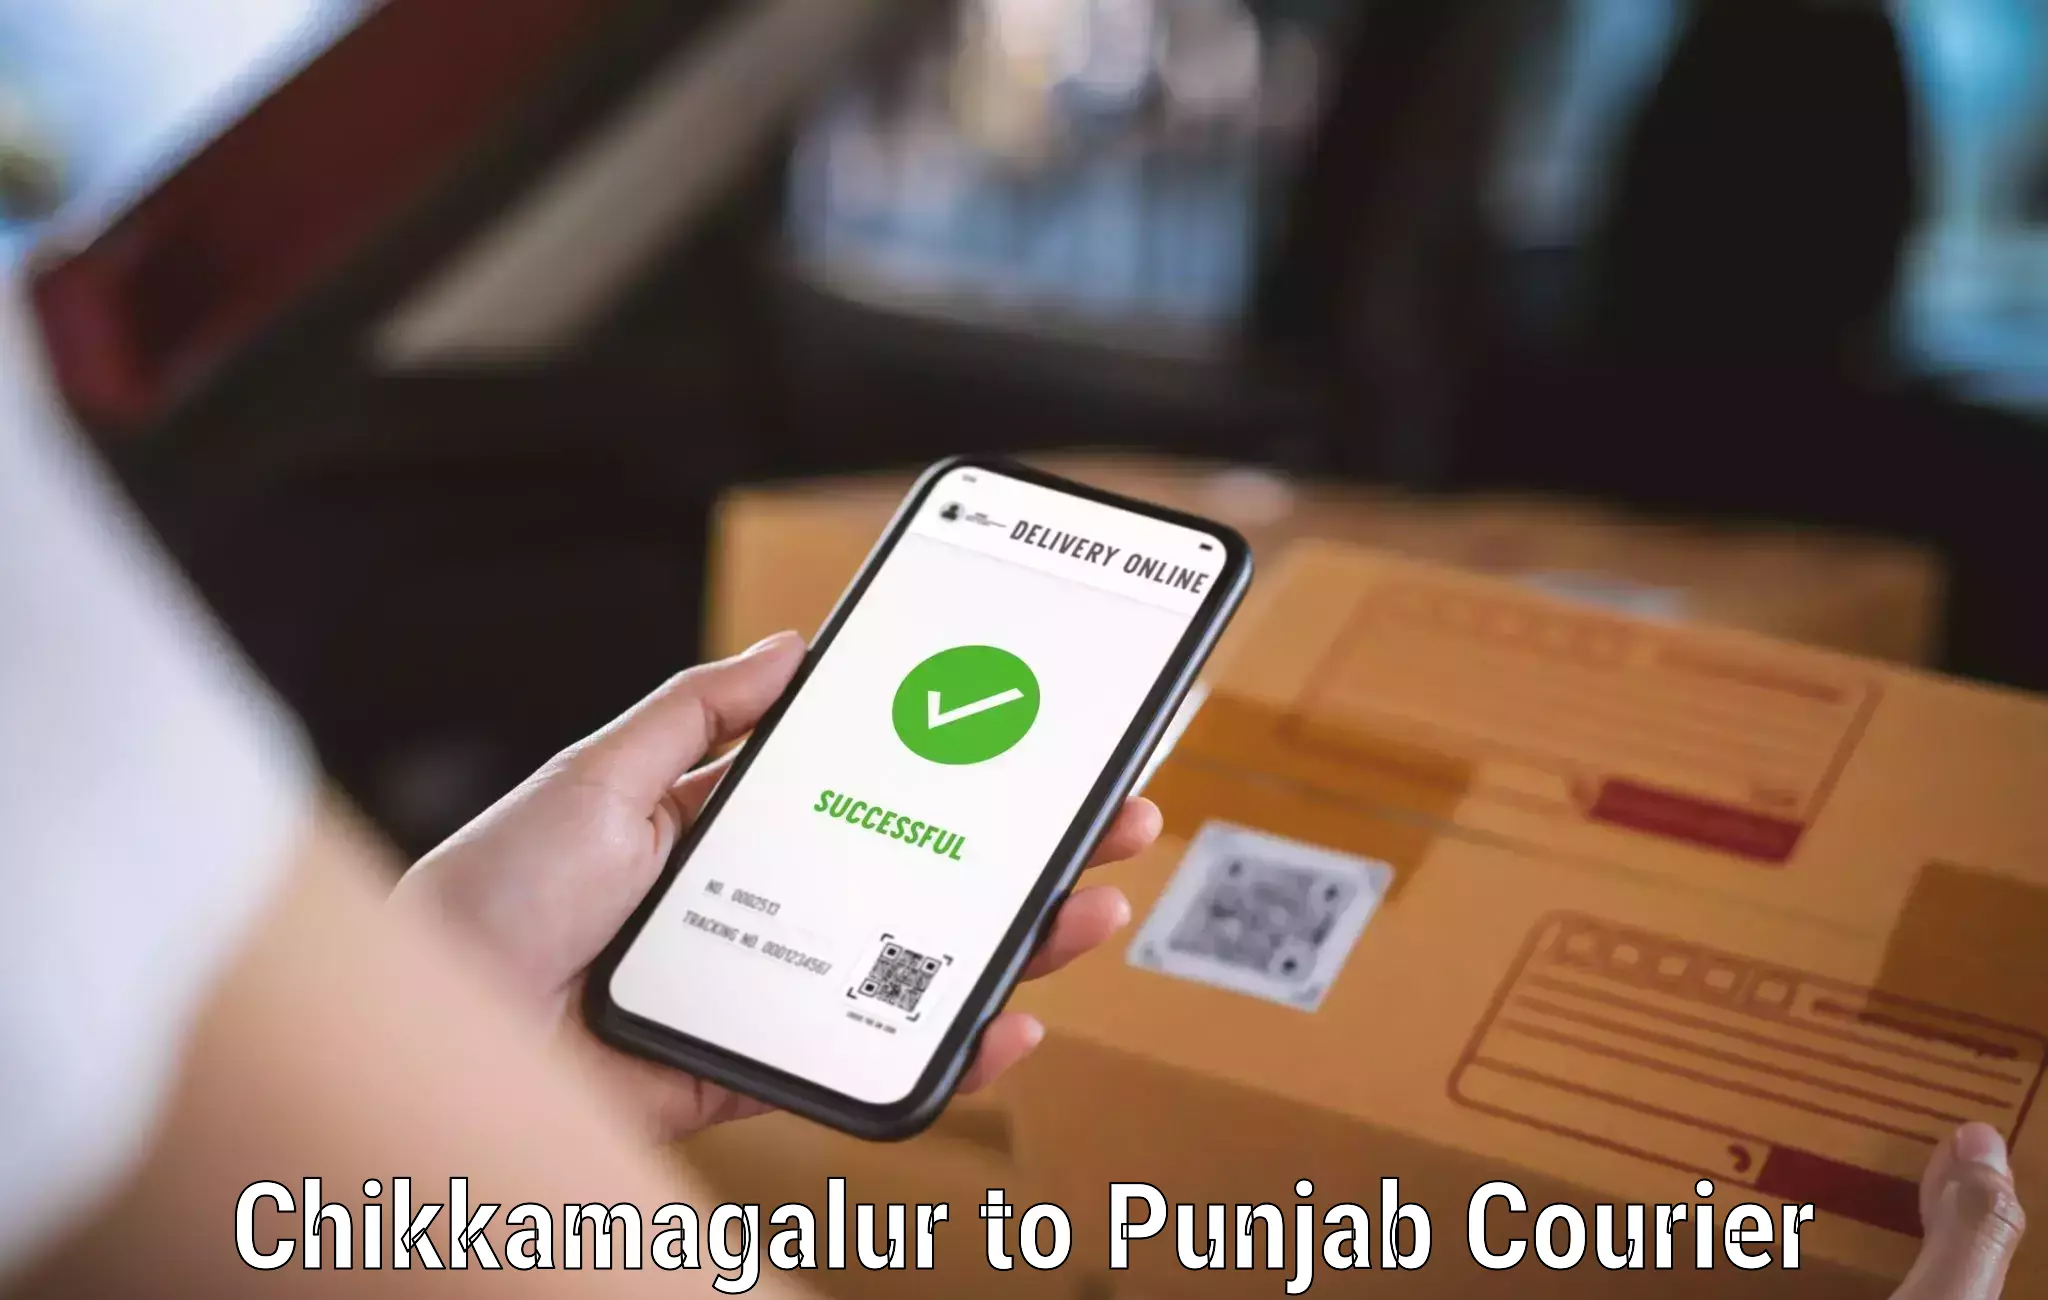 Quick dispatch service in Chikkamagalur to Punjab Agricultural University Ludhiana